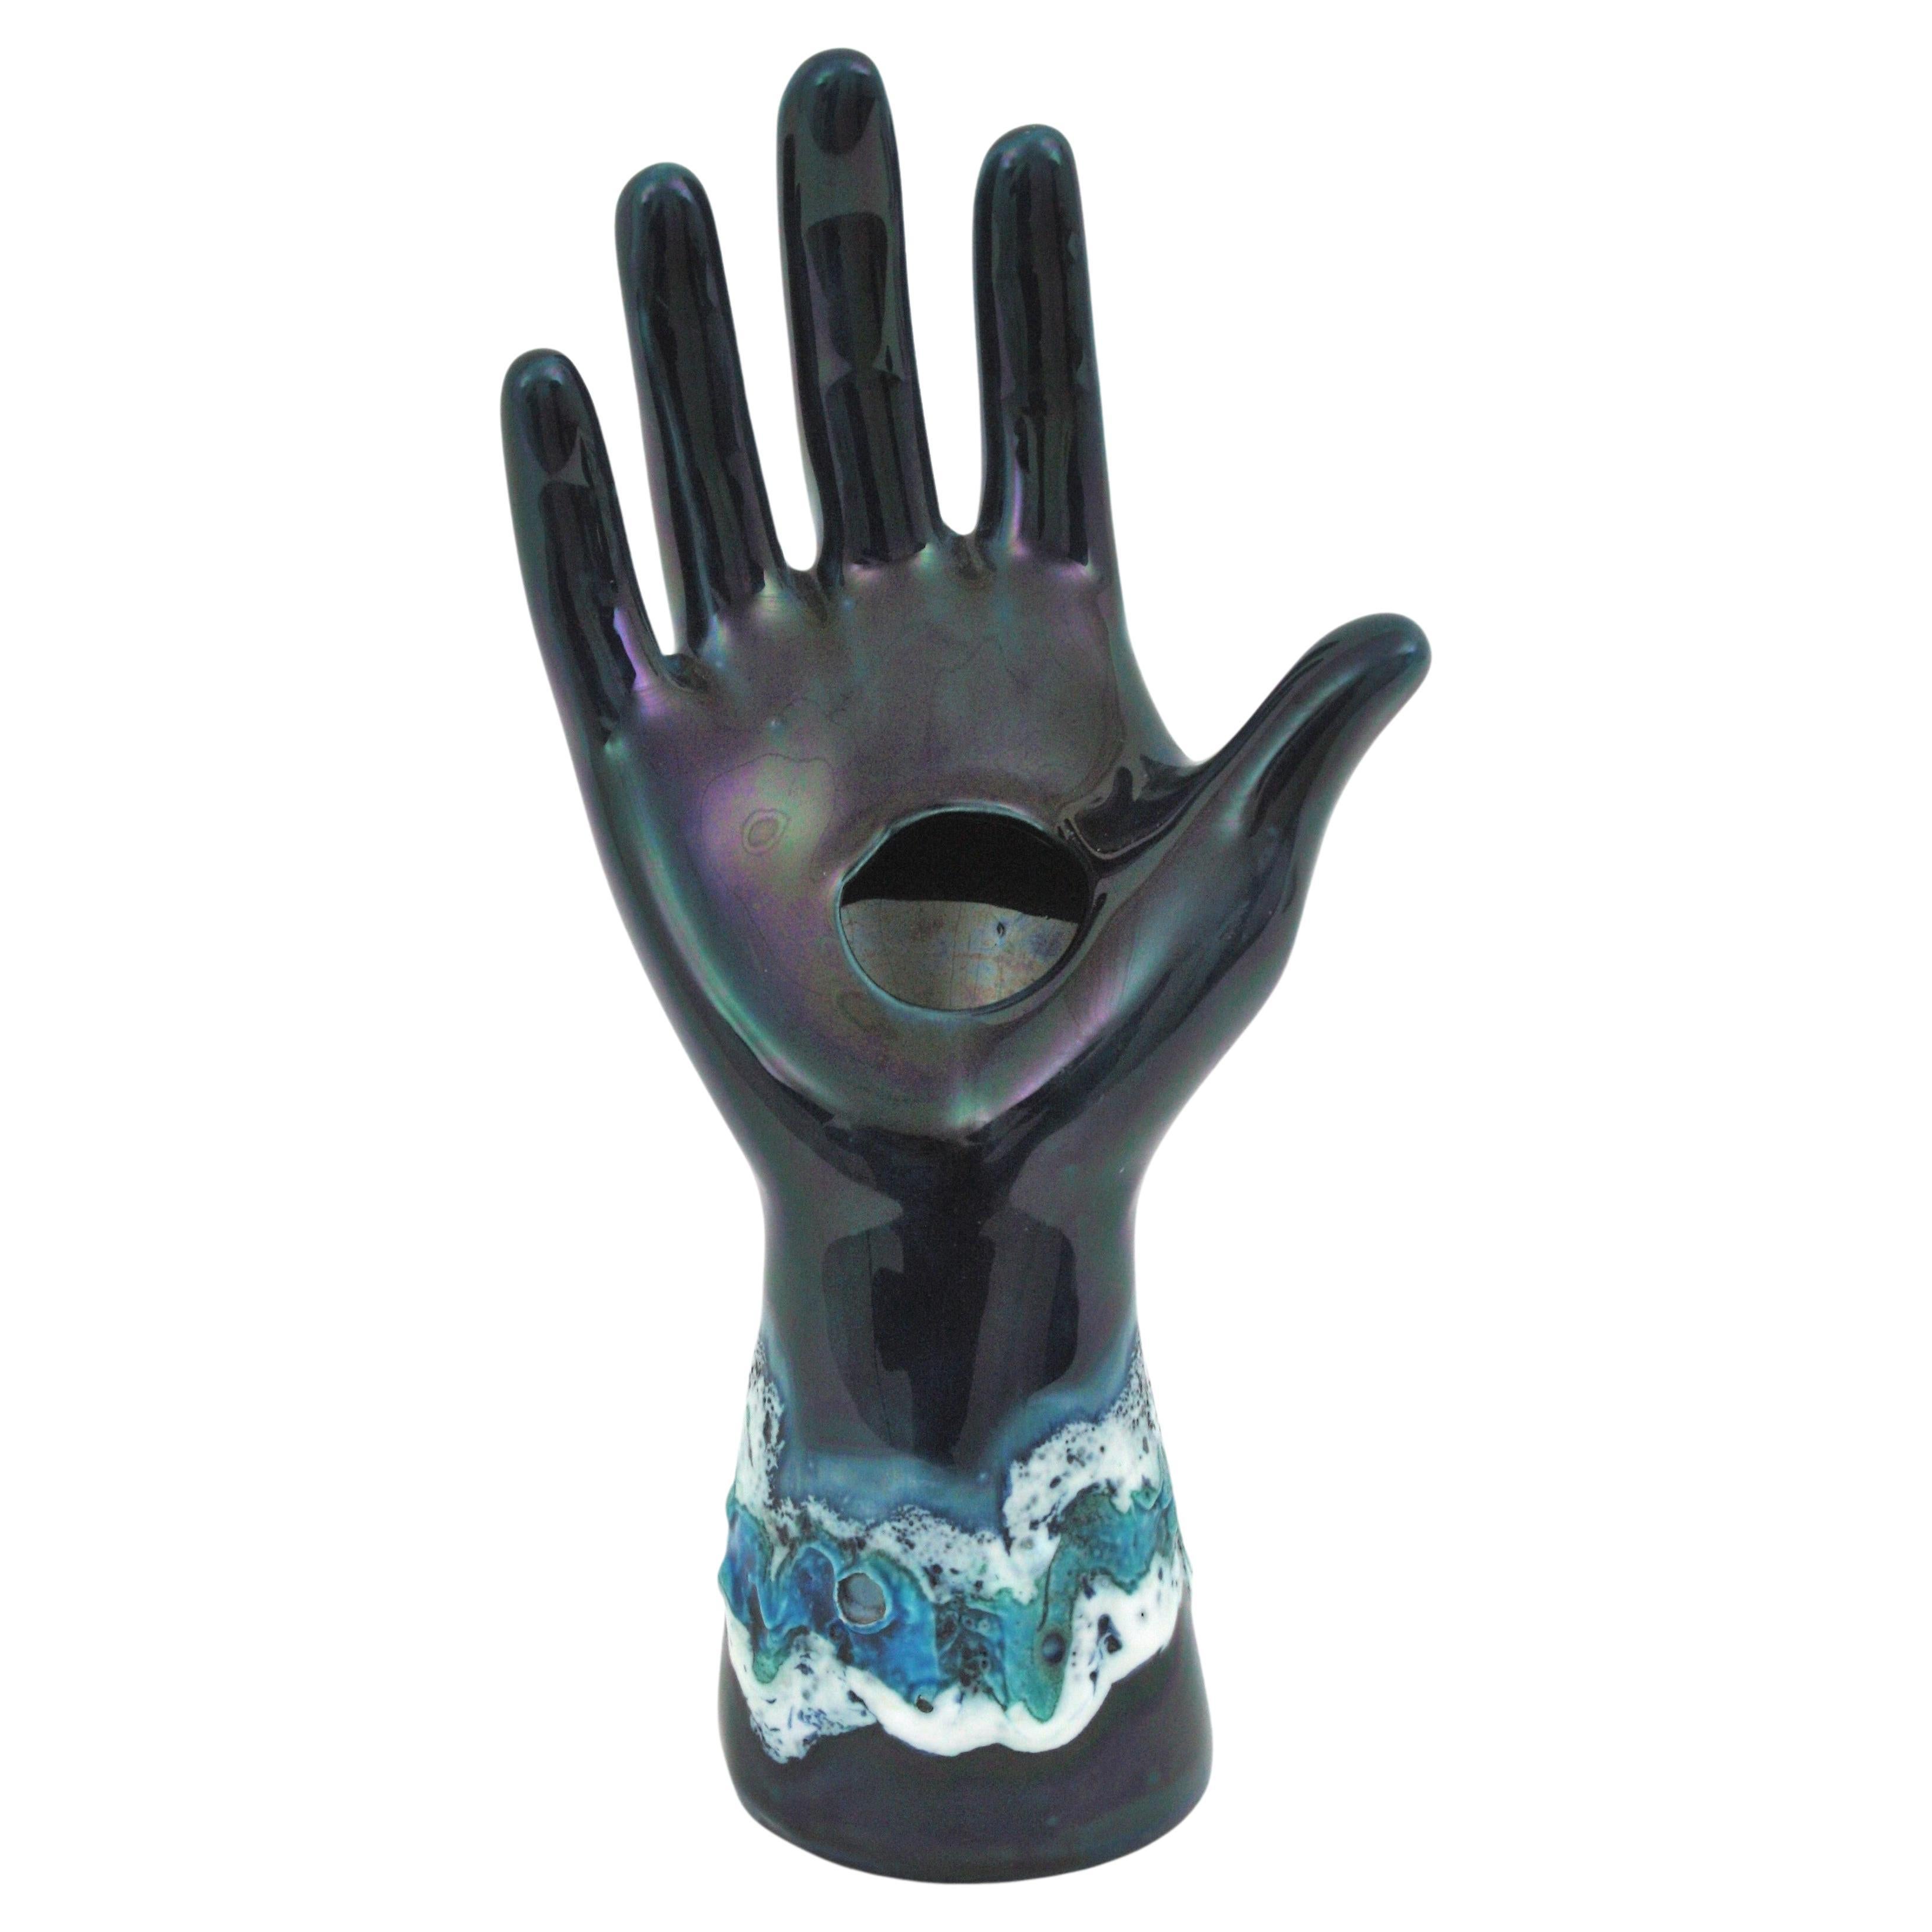 Mid-Century Modern Blue Glazed Ceramic Hand Sculpture by Vallauris. France, 1950s
Eye-catching iridiscent blue ceramic hand vase with fat lava details in shades of blue and white glazed ceramic
Beautiful from all sides.
To be used as rings display